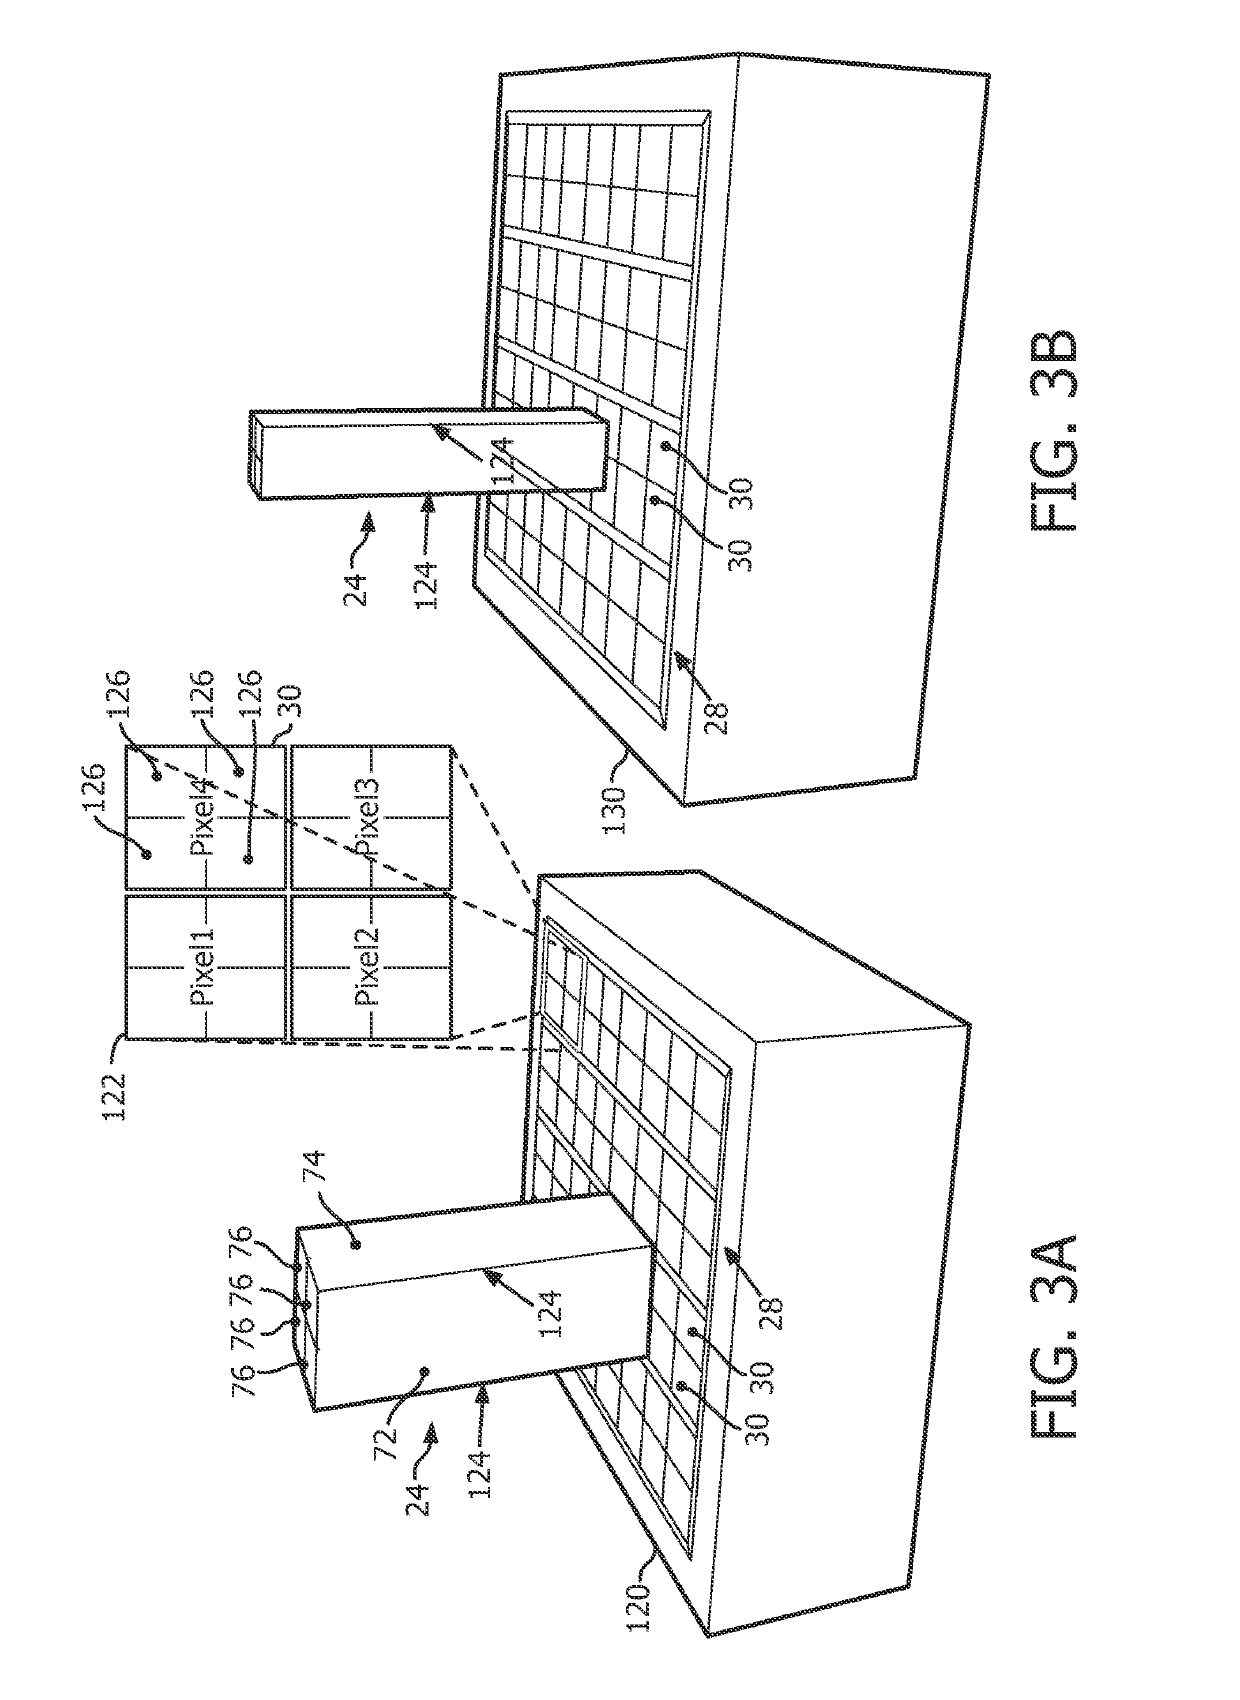 Pet detector scintillator arrangement with light sharing and depth of interaction estimation